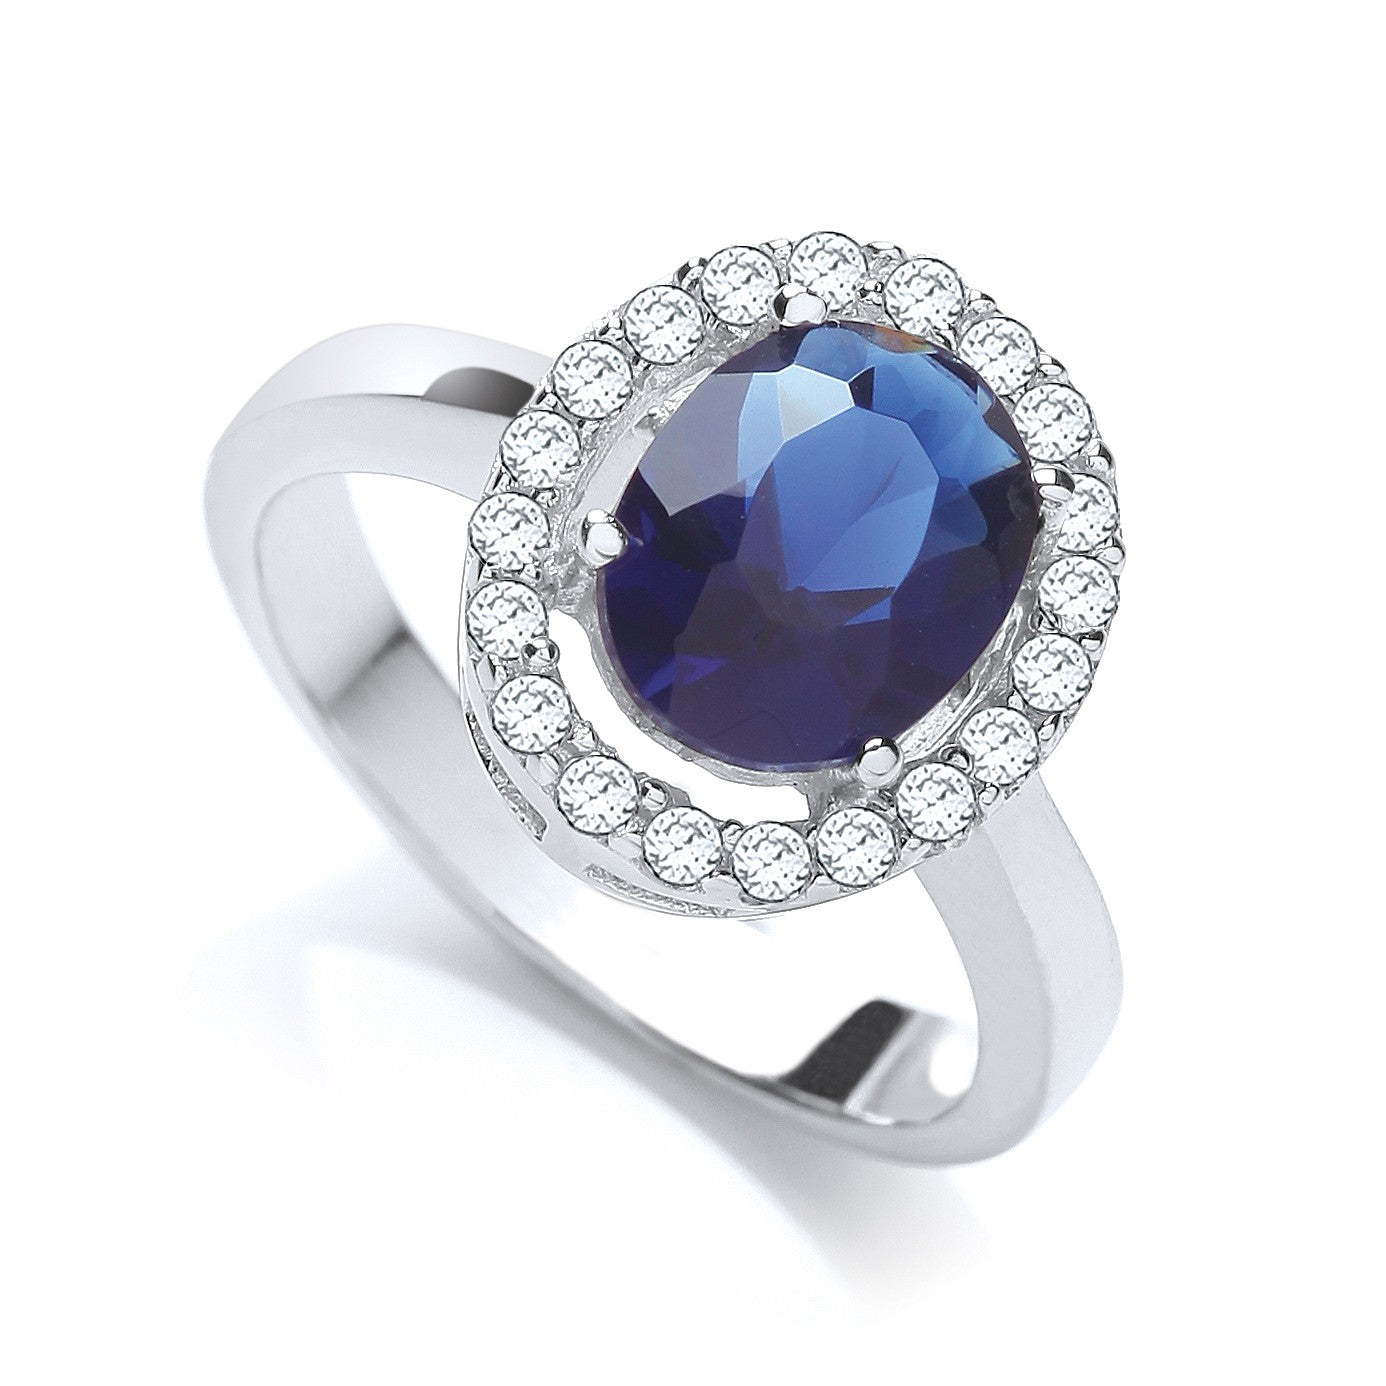 Blue Oval Cubic Zirconia Cluster Ring